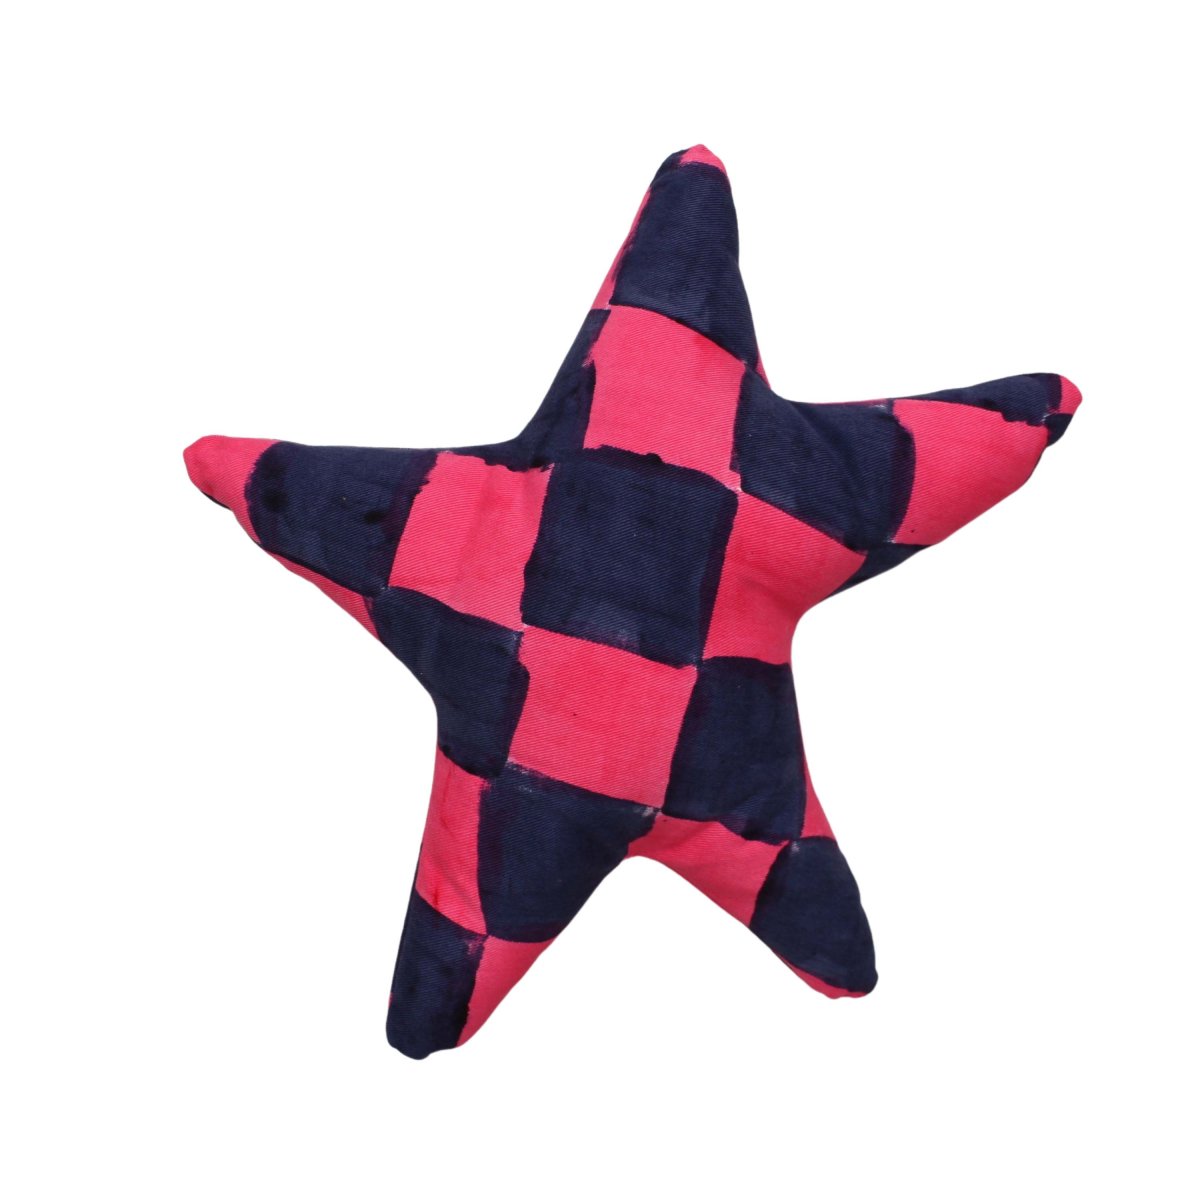 denim star pillowspink and blue checkers